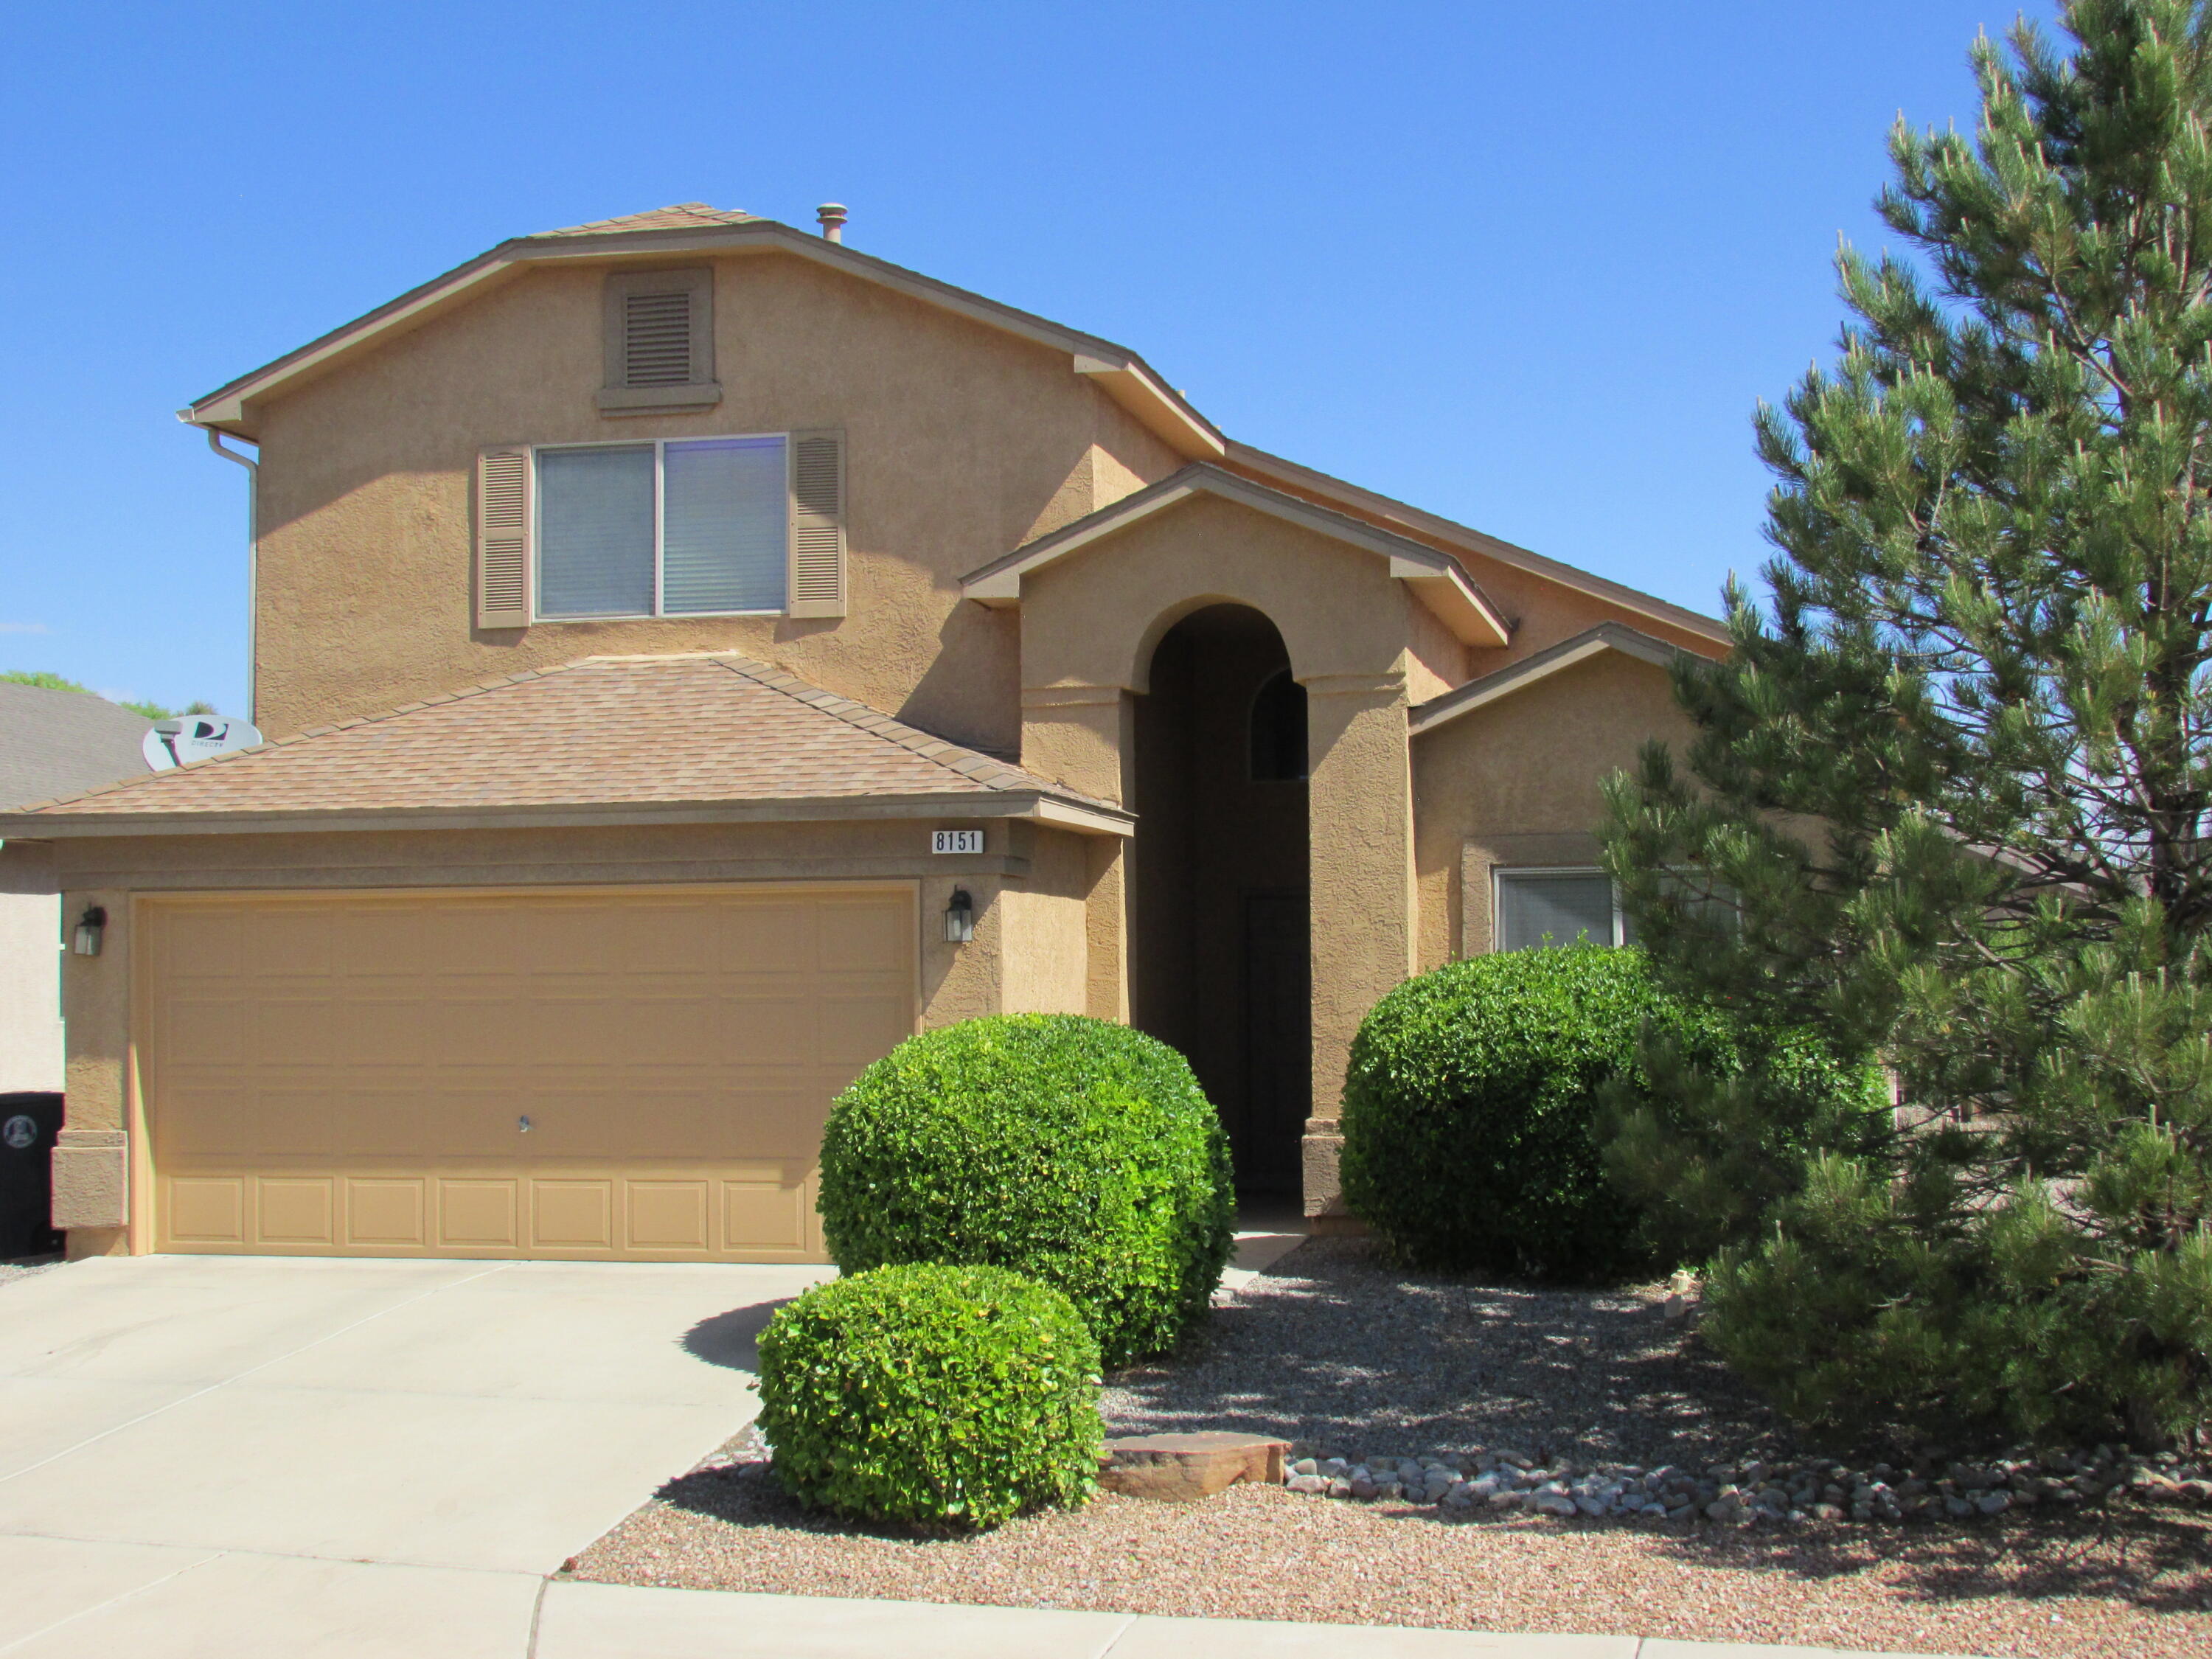 8151 Long Mesa Place NW, Albuquerque, New Mexico 87114, 3 Bedrooms Bedrooms, ,3 BathroomsBathrooms,Residential,For Sale,8151 Long Mesa Place NW,1062356